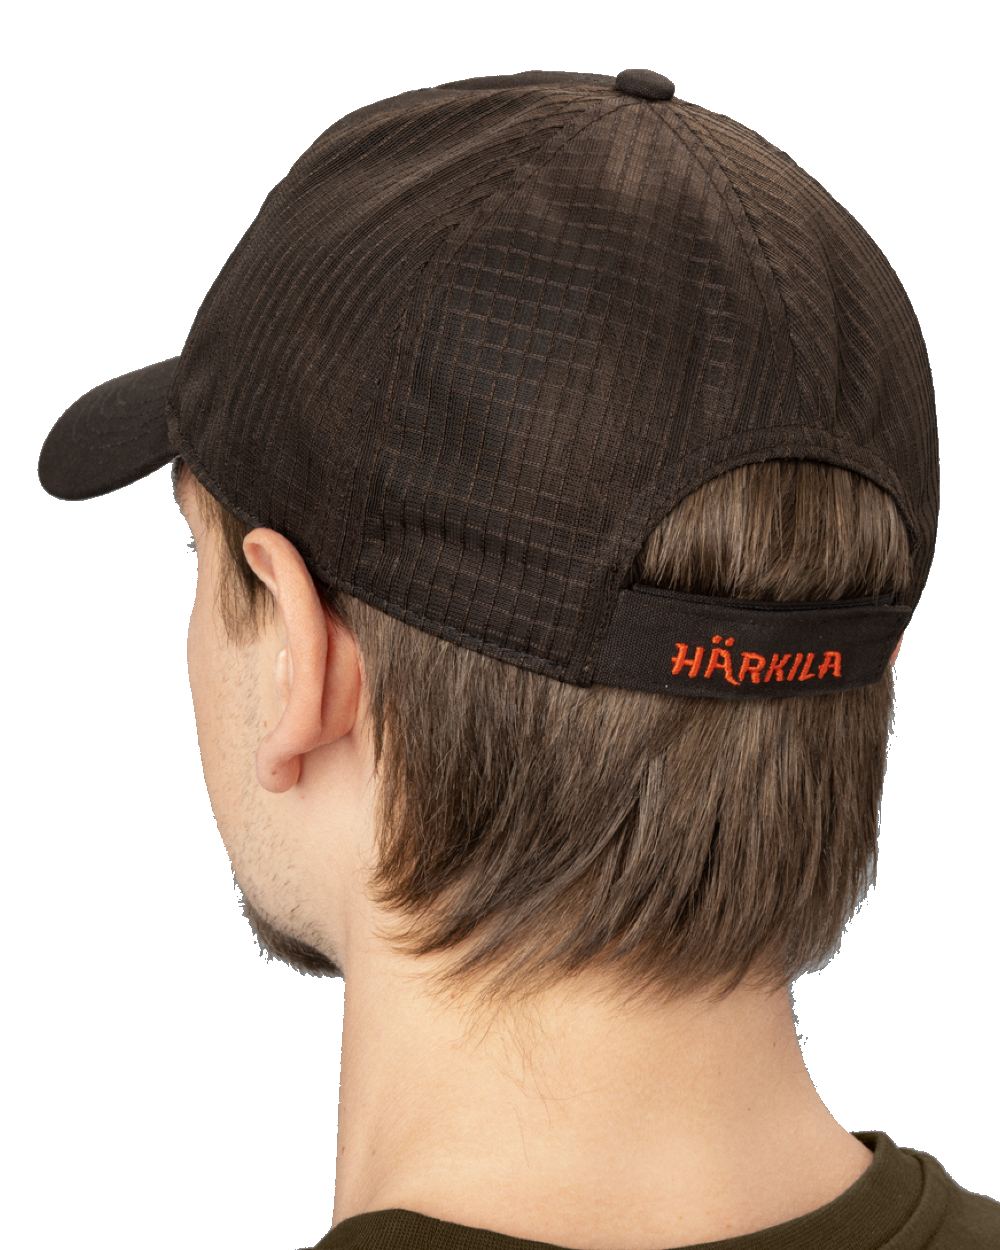 Shadow Brown coloured Harkila Impact Cap worn by model on white background